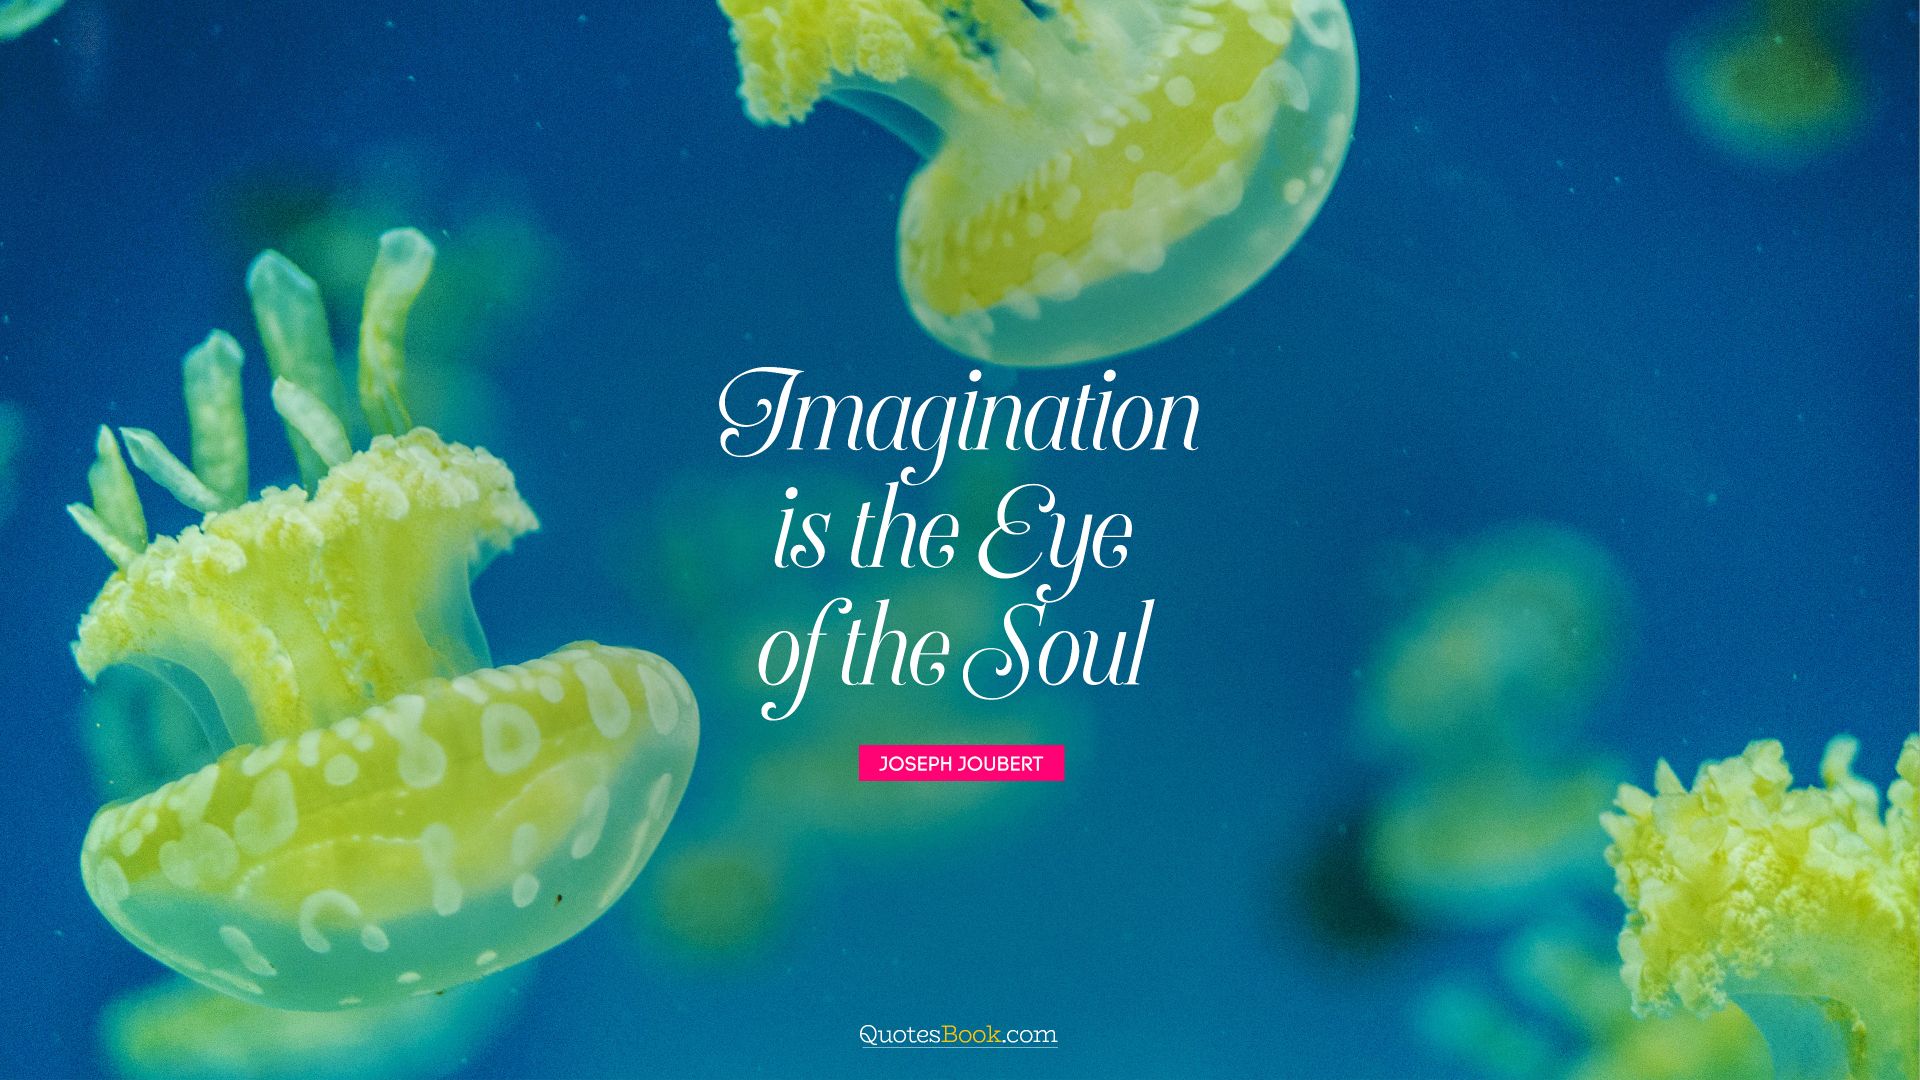 Imagination is the eye of the soul. - Quote by Joseph Joubert